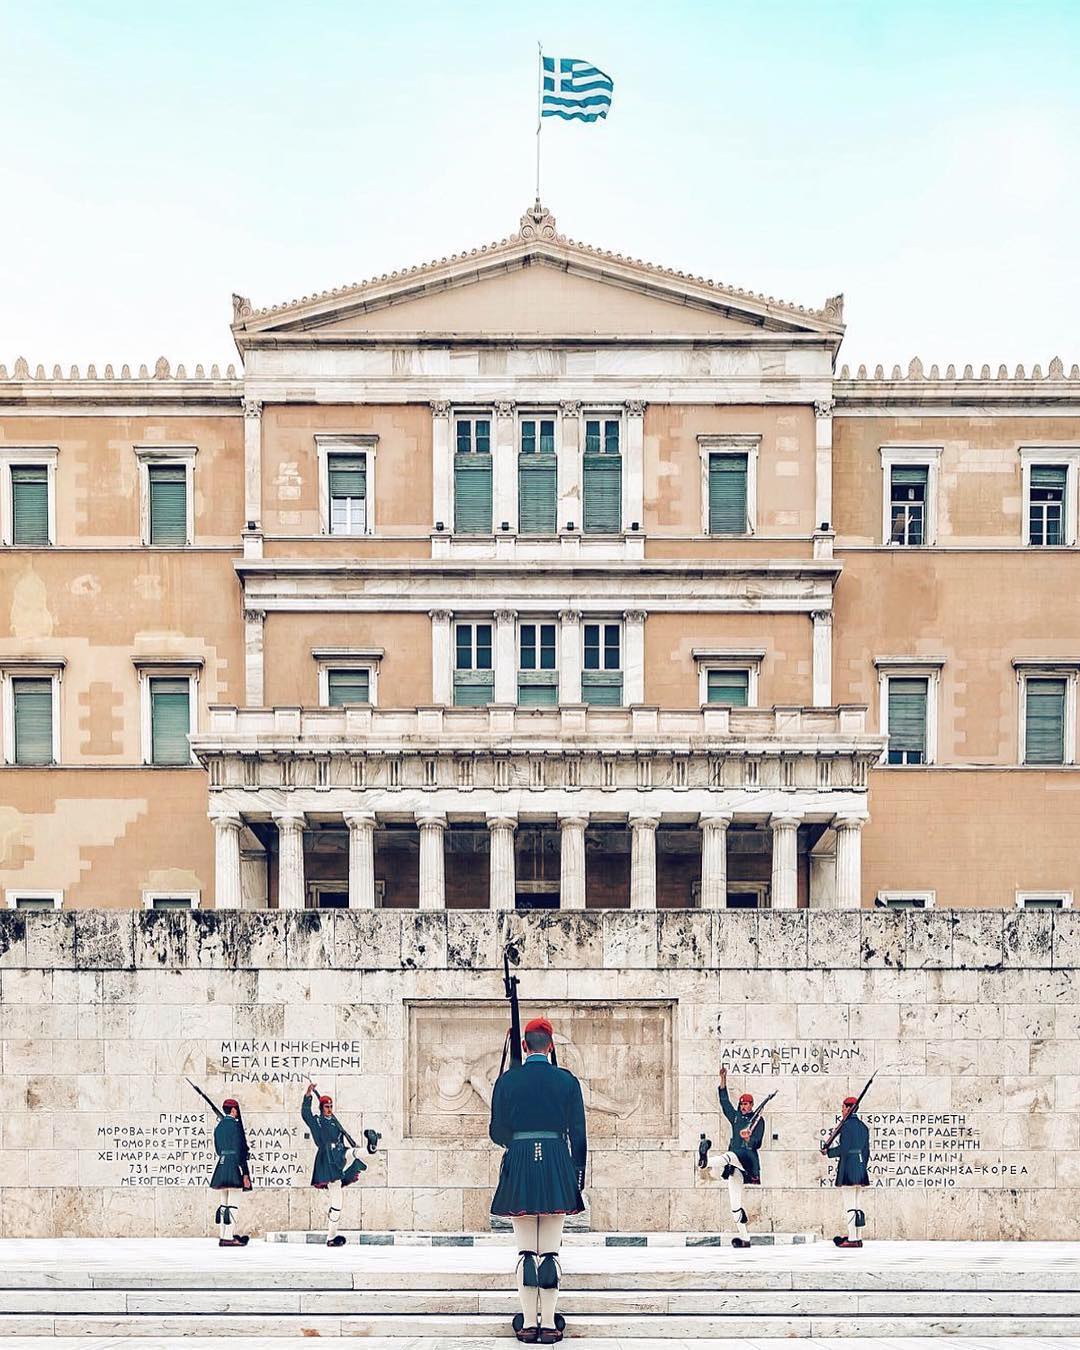 Accidentally Wes Anderson - Hellenic Parliament